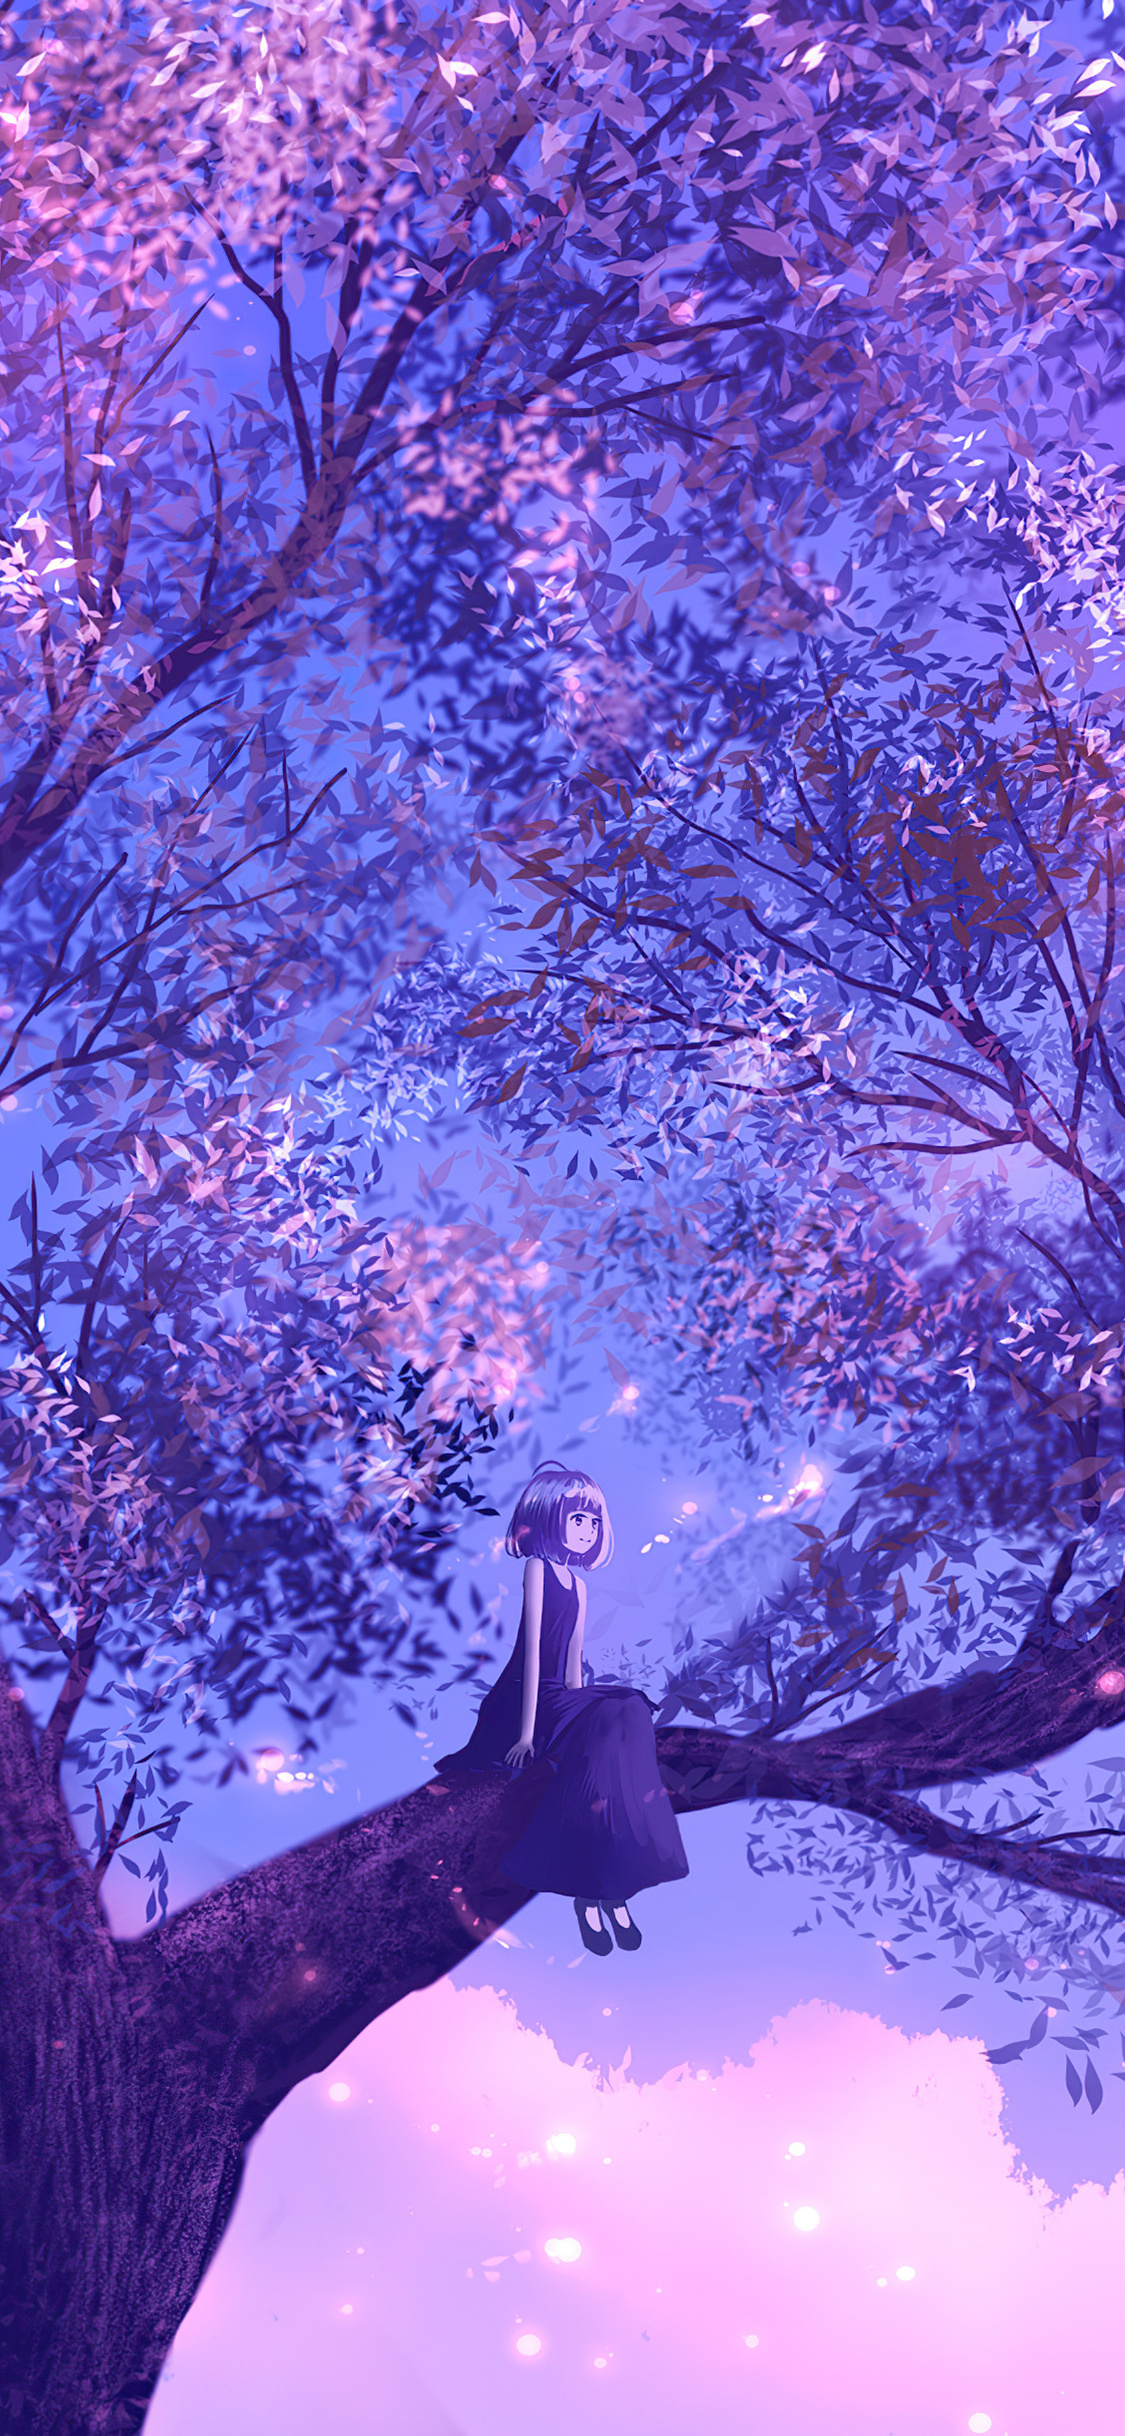 Featured image of post Purple Anime Wallpaper 4K Iphone / .vaporwave anime wallpaper, anime space wallpaper, anime iphone wallpaper, animated anime wallpaper, cherry blossom anime wallpaper, lewd sunset wallpaper, japanese anime wallpaper, black and white anime wallpaper, anime laptop 3 hd wallpaper download.